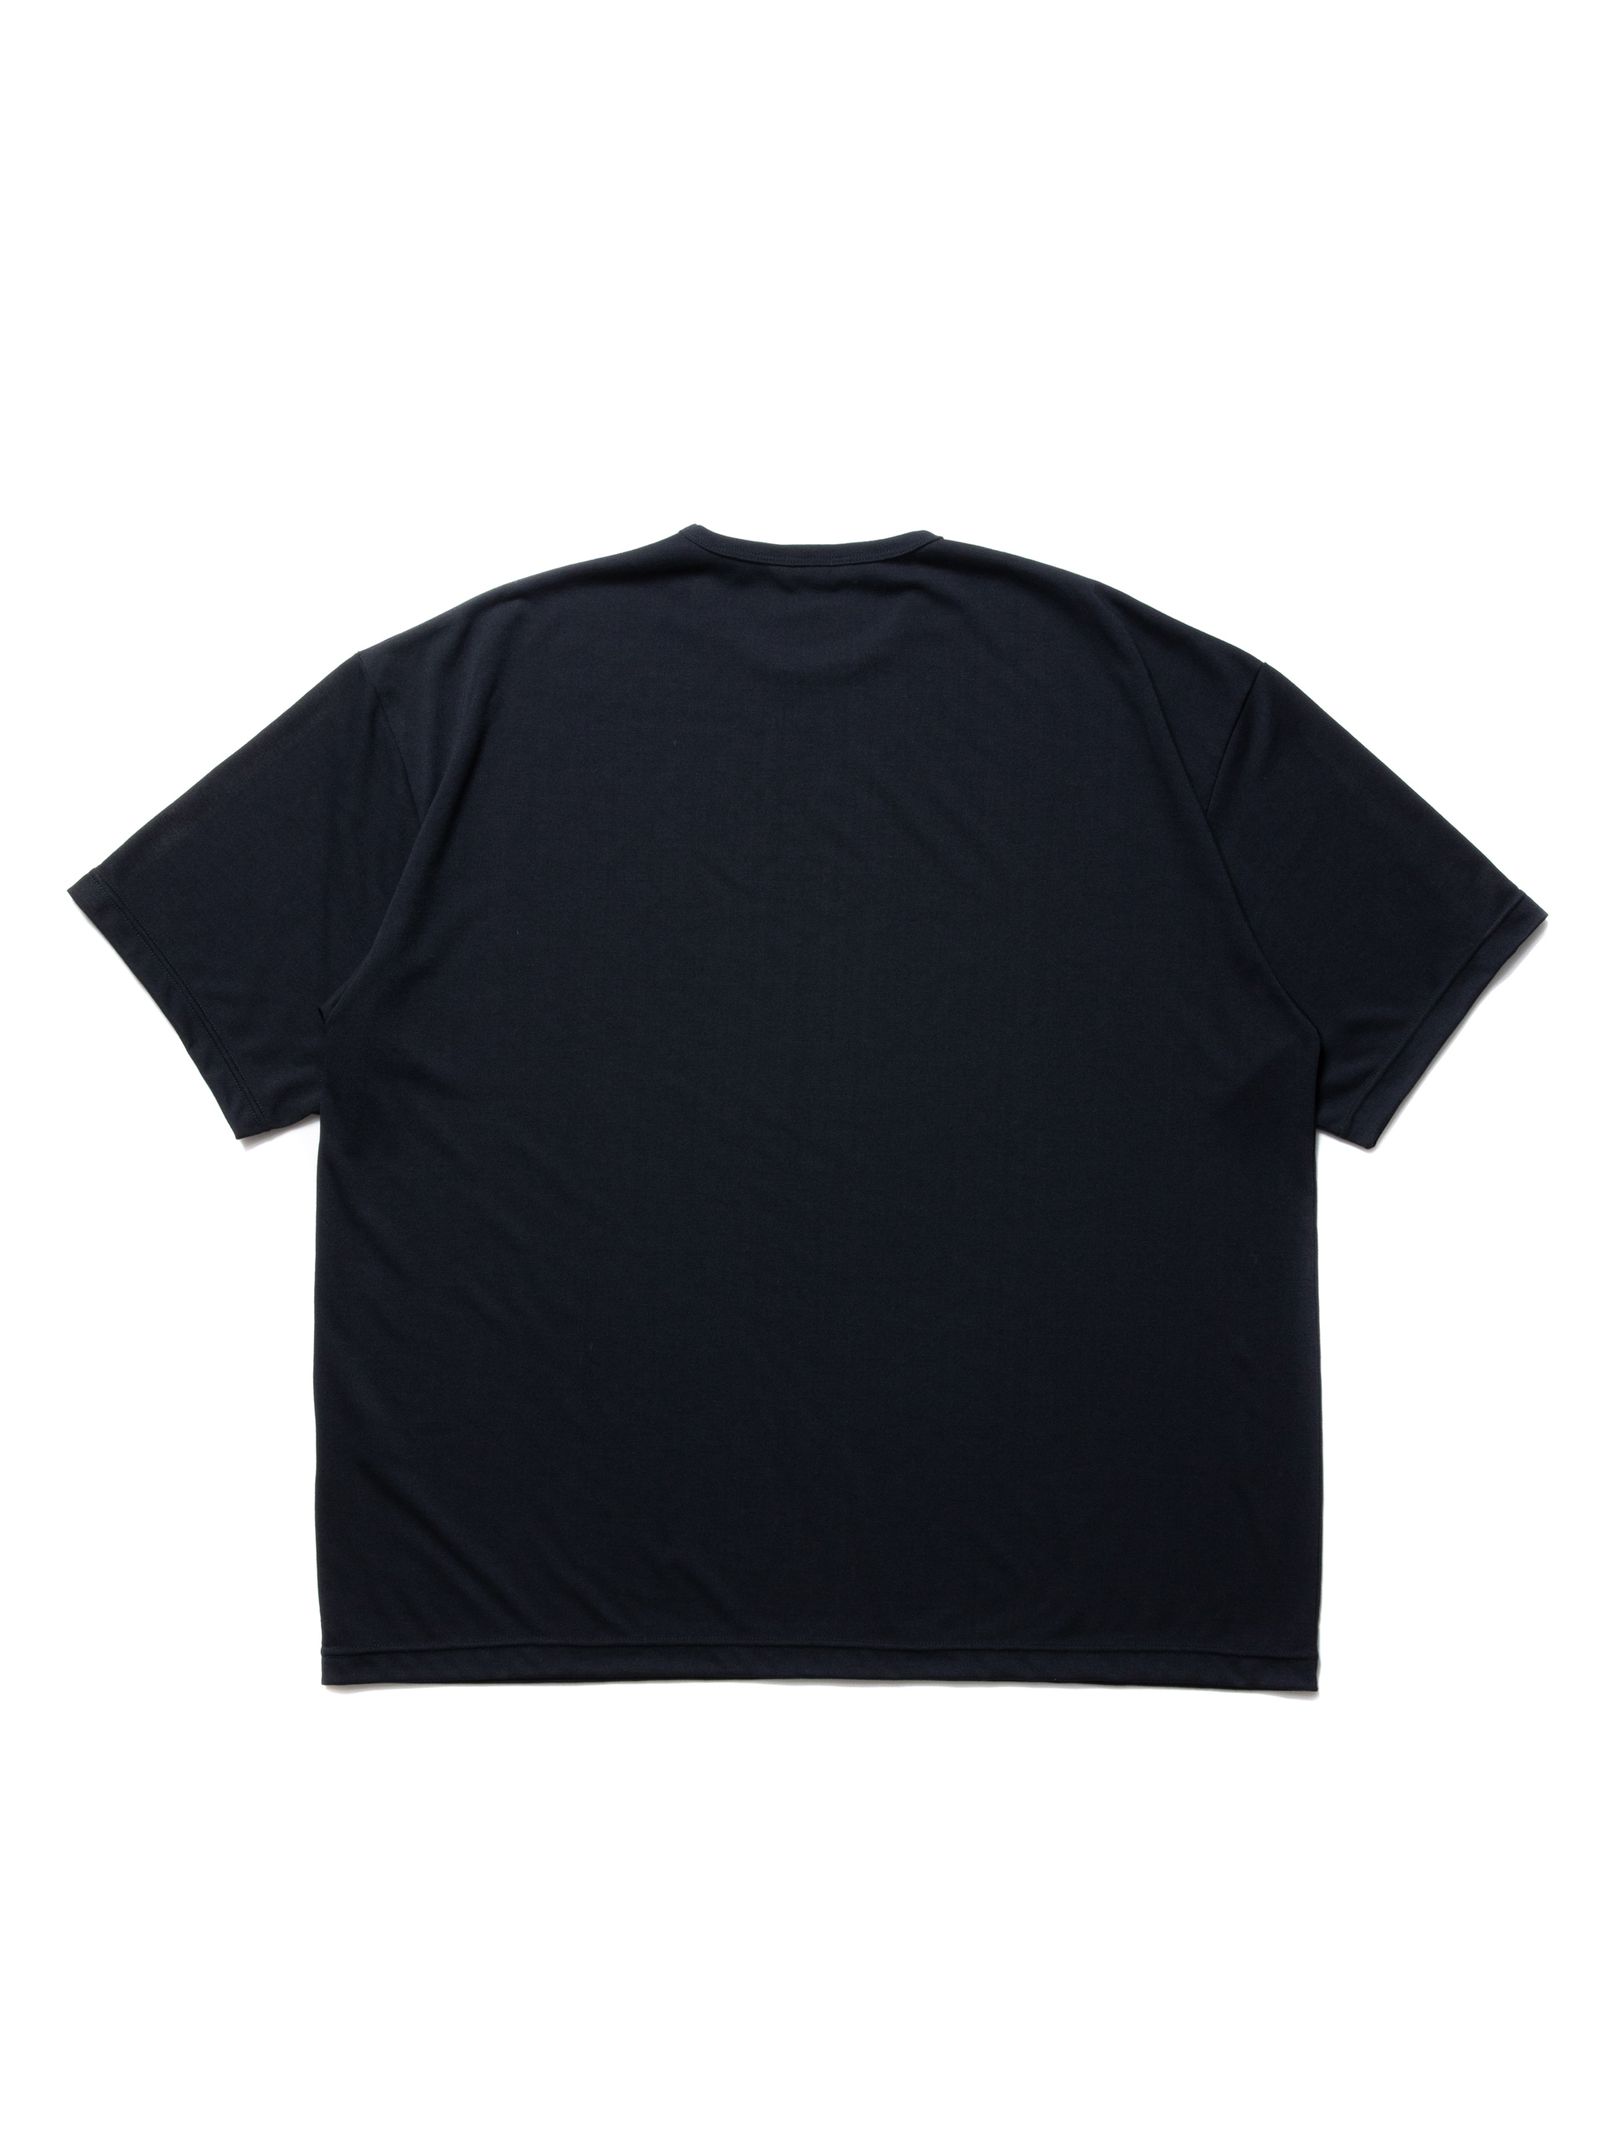 COOTIE PRODUCTIONS - Dry Tech Jersey Oversized S/S Tee